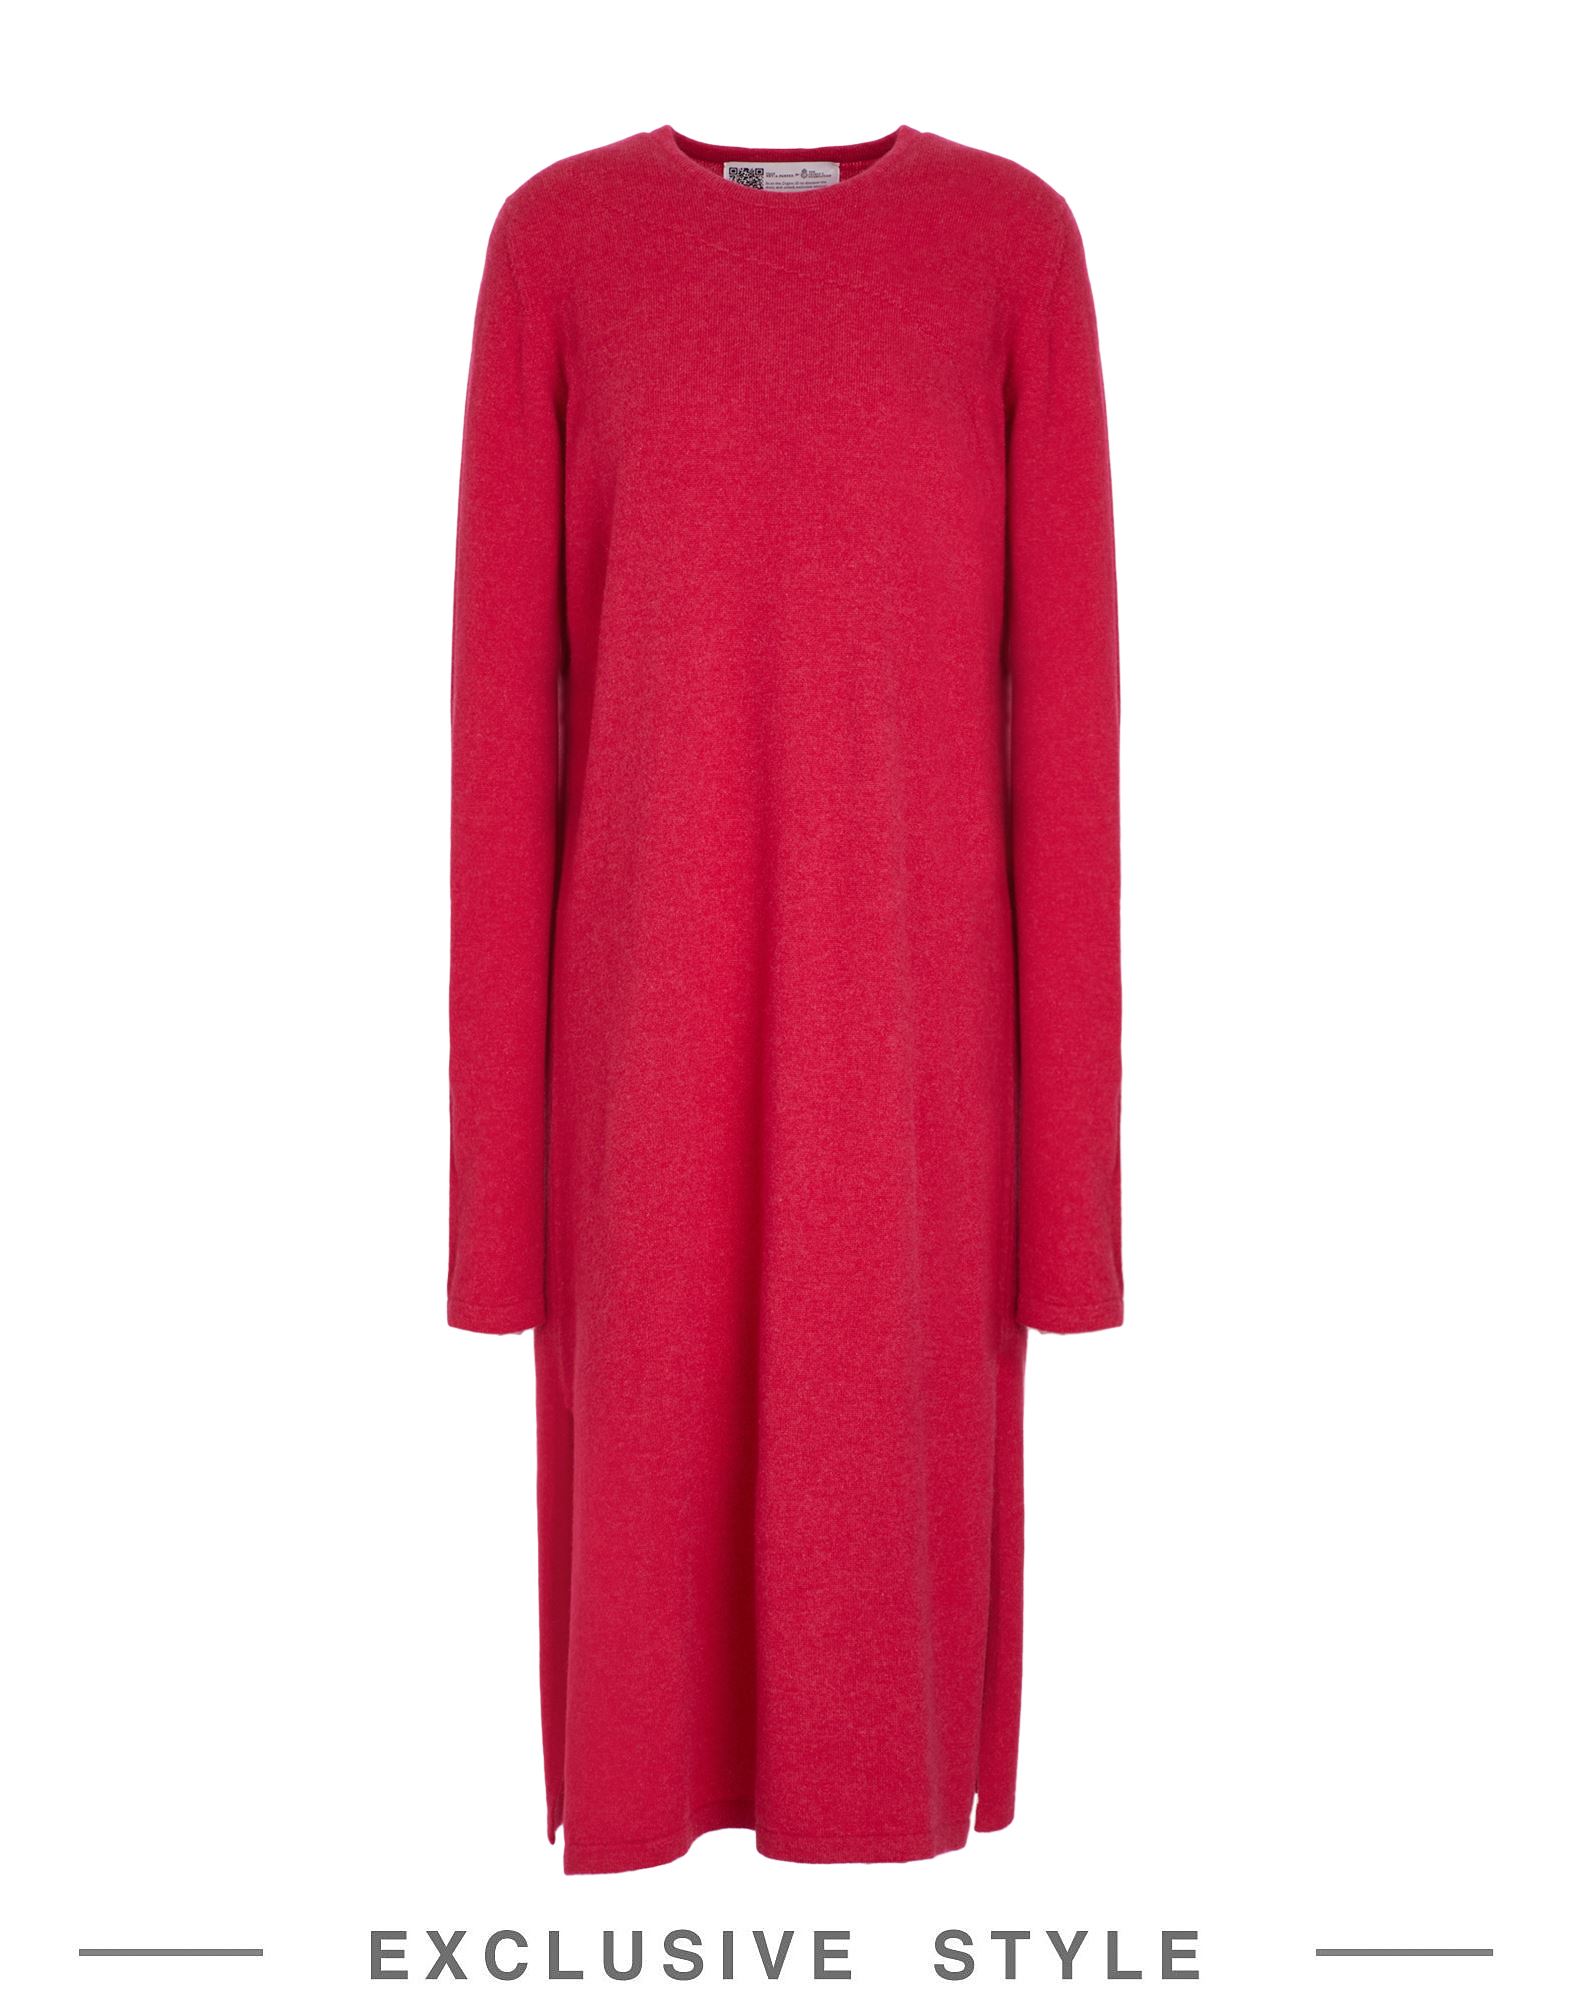 Yoox Net-a-porter For The Prince's Foundation Midi Dresses In Pink